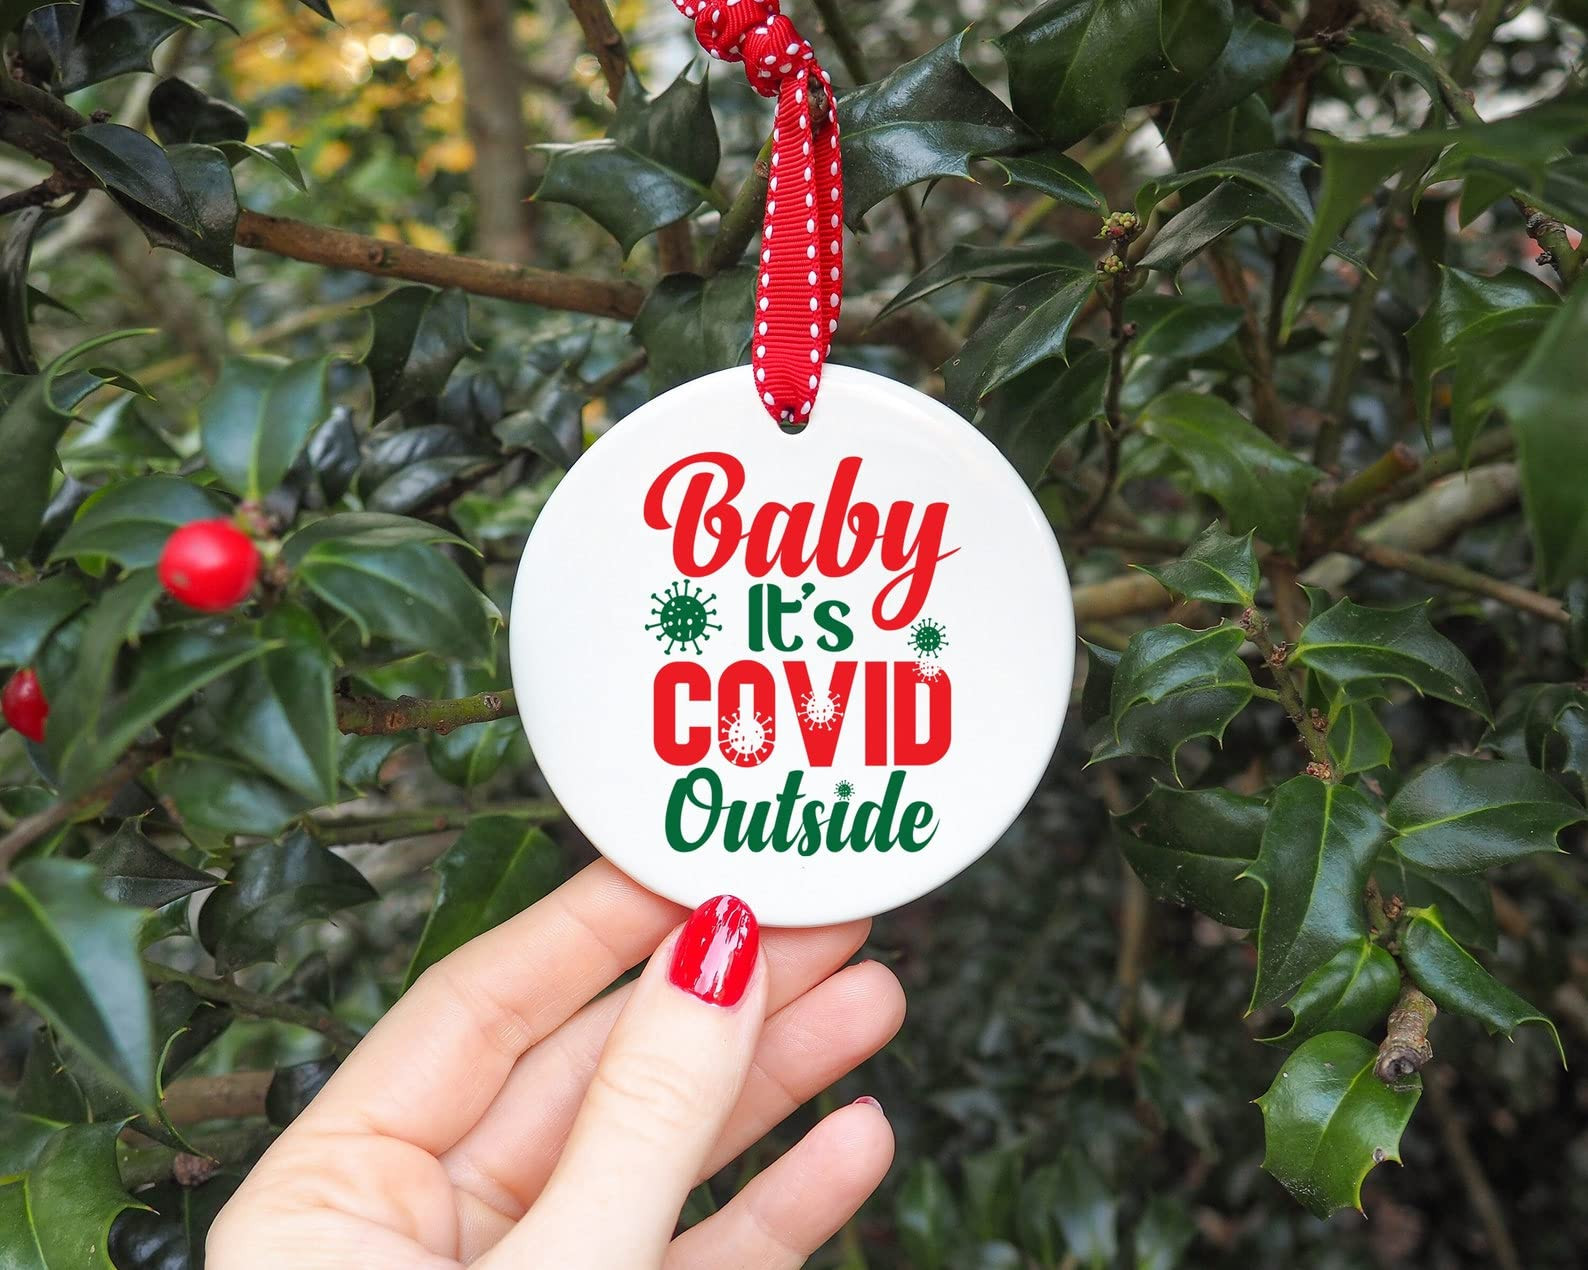 Baby Its Co-vid Outside Christmas Ornament Funny Pandemic Ornament For Little Daughter Son From Mom Dad Christmas Decorations Circle Heart Star Oval Ornament Xmas Tree Decor